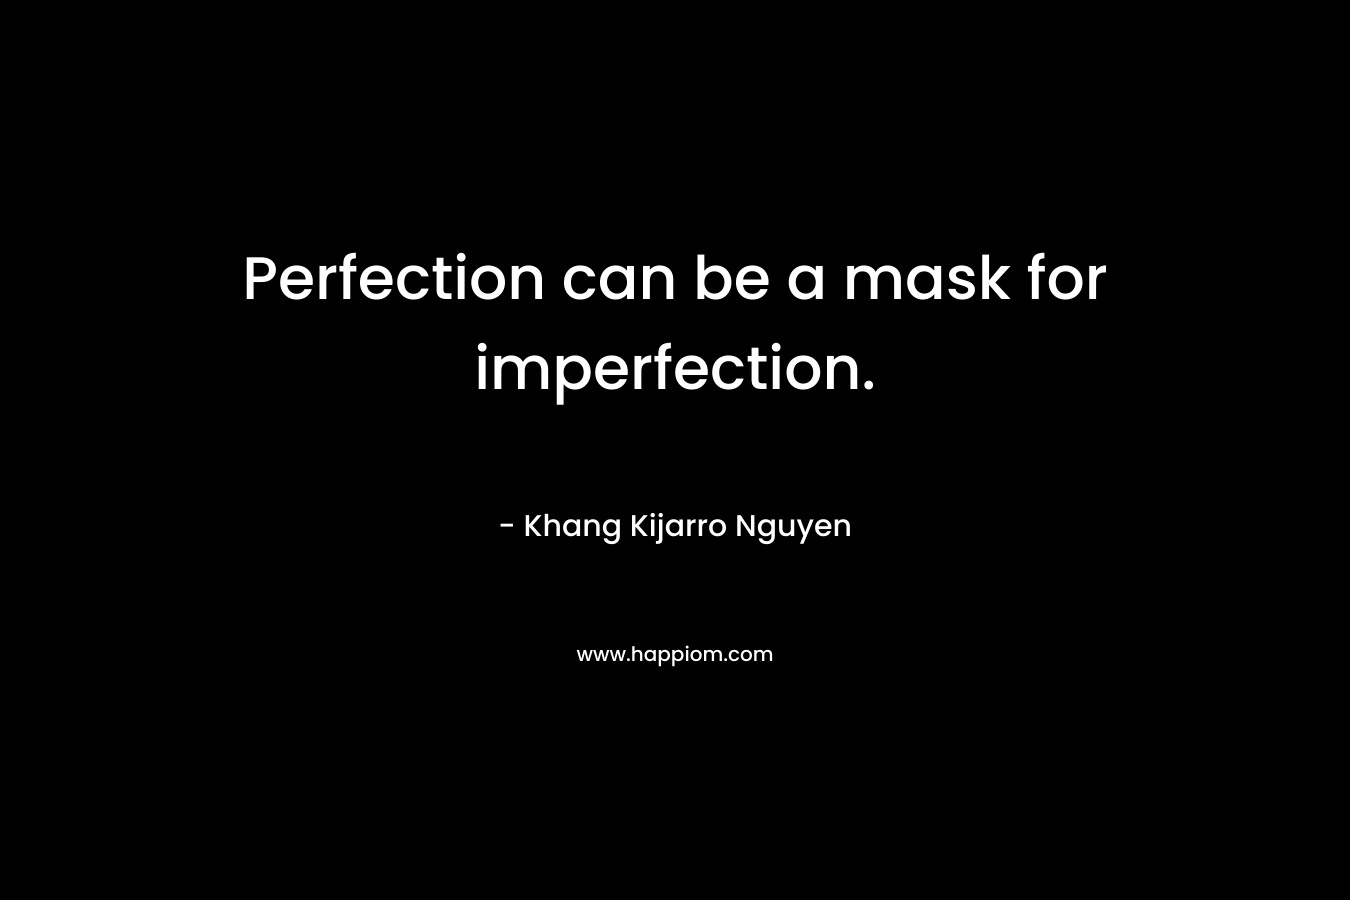 Perfection can be a mask for imperfection.